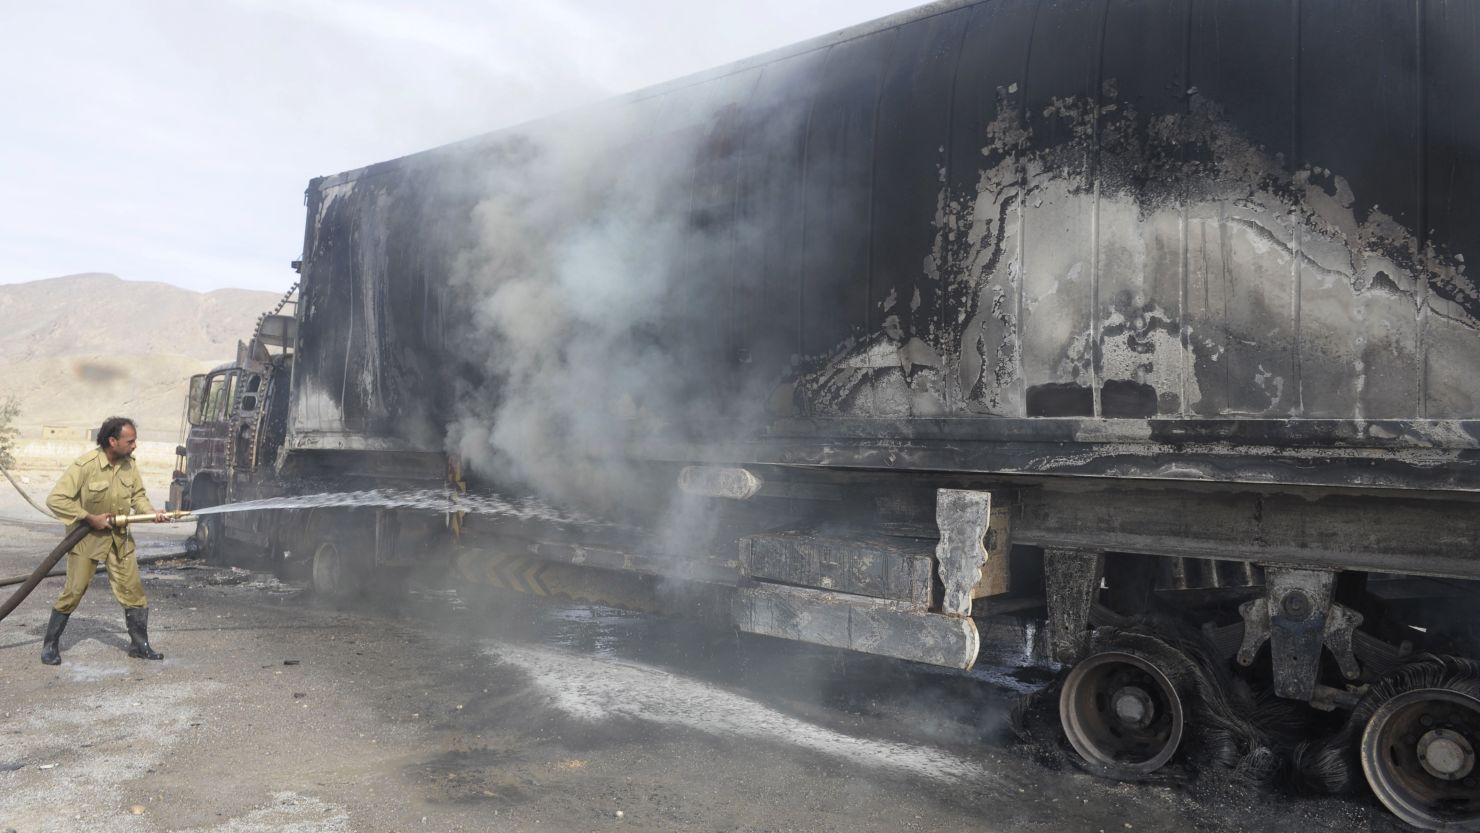 A Pakistani firefighter extinguishes a fire on a burning NATO supply trucks near Quetta on November 20.